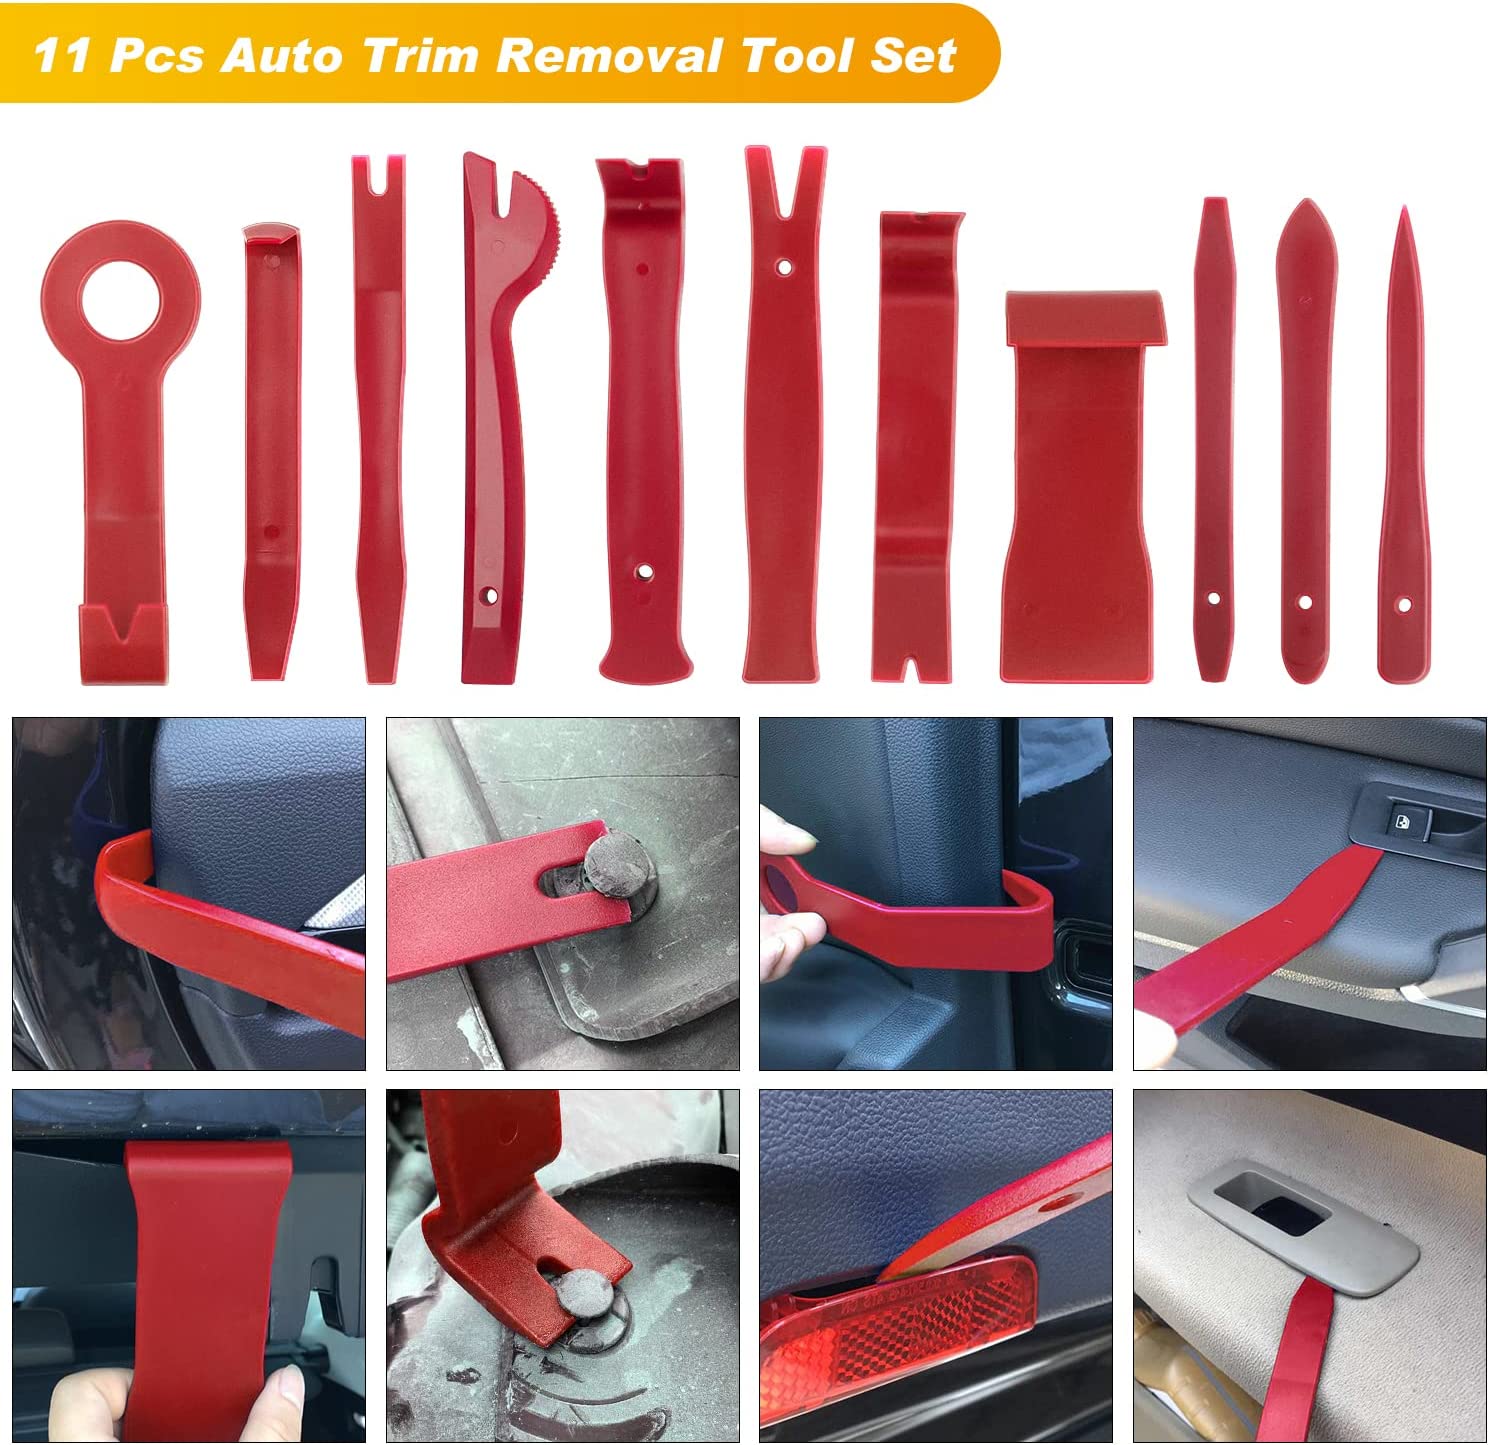 19 Pcs Trim Removal Tool Set & Clip Plier Upholstery Remover Nylon Car Panel Removal Set with Portable Storage Bag Red